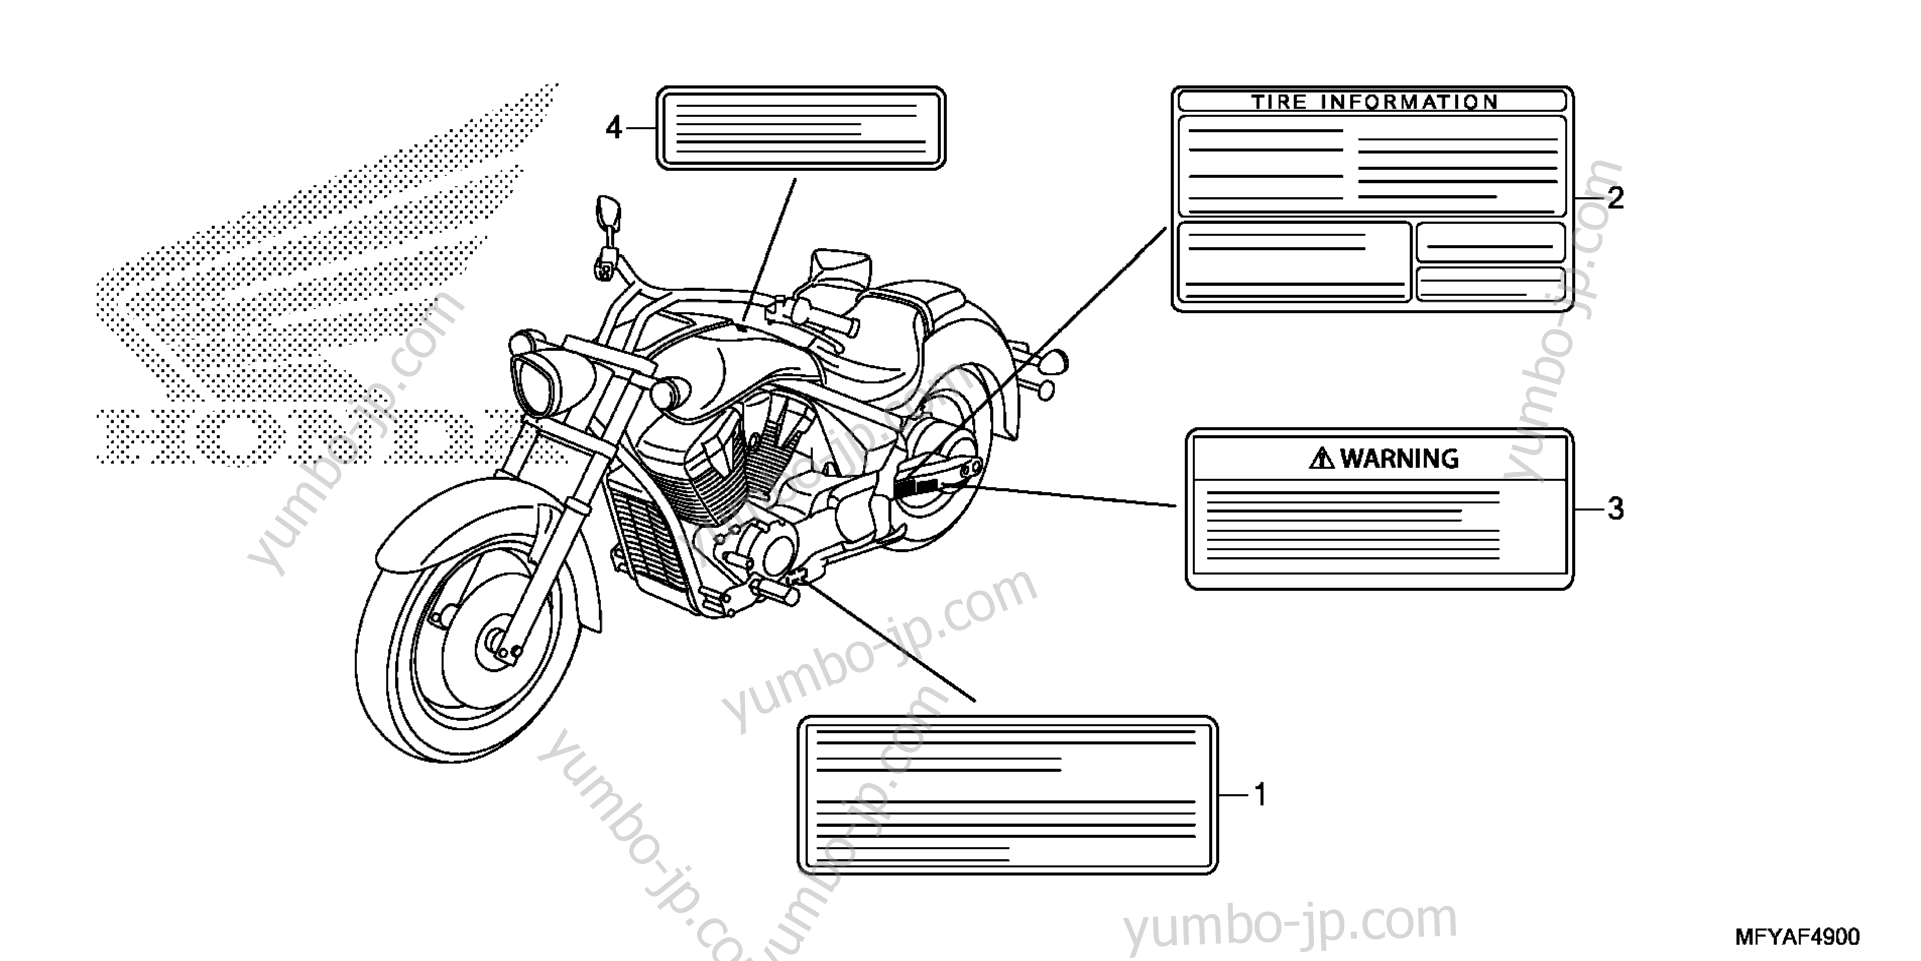 CAUTION LABEL for motorcycles HONDA VT1300CR AC 2012 year